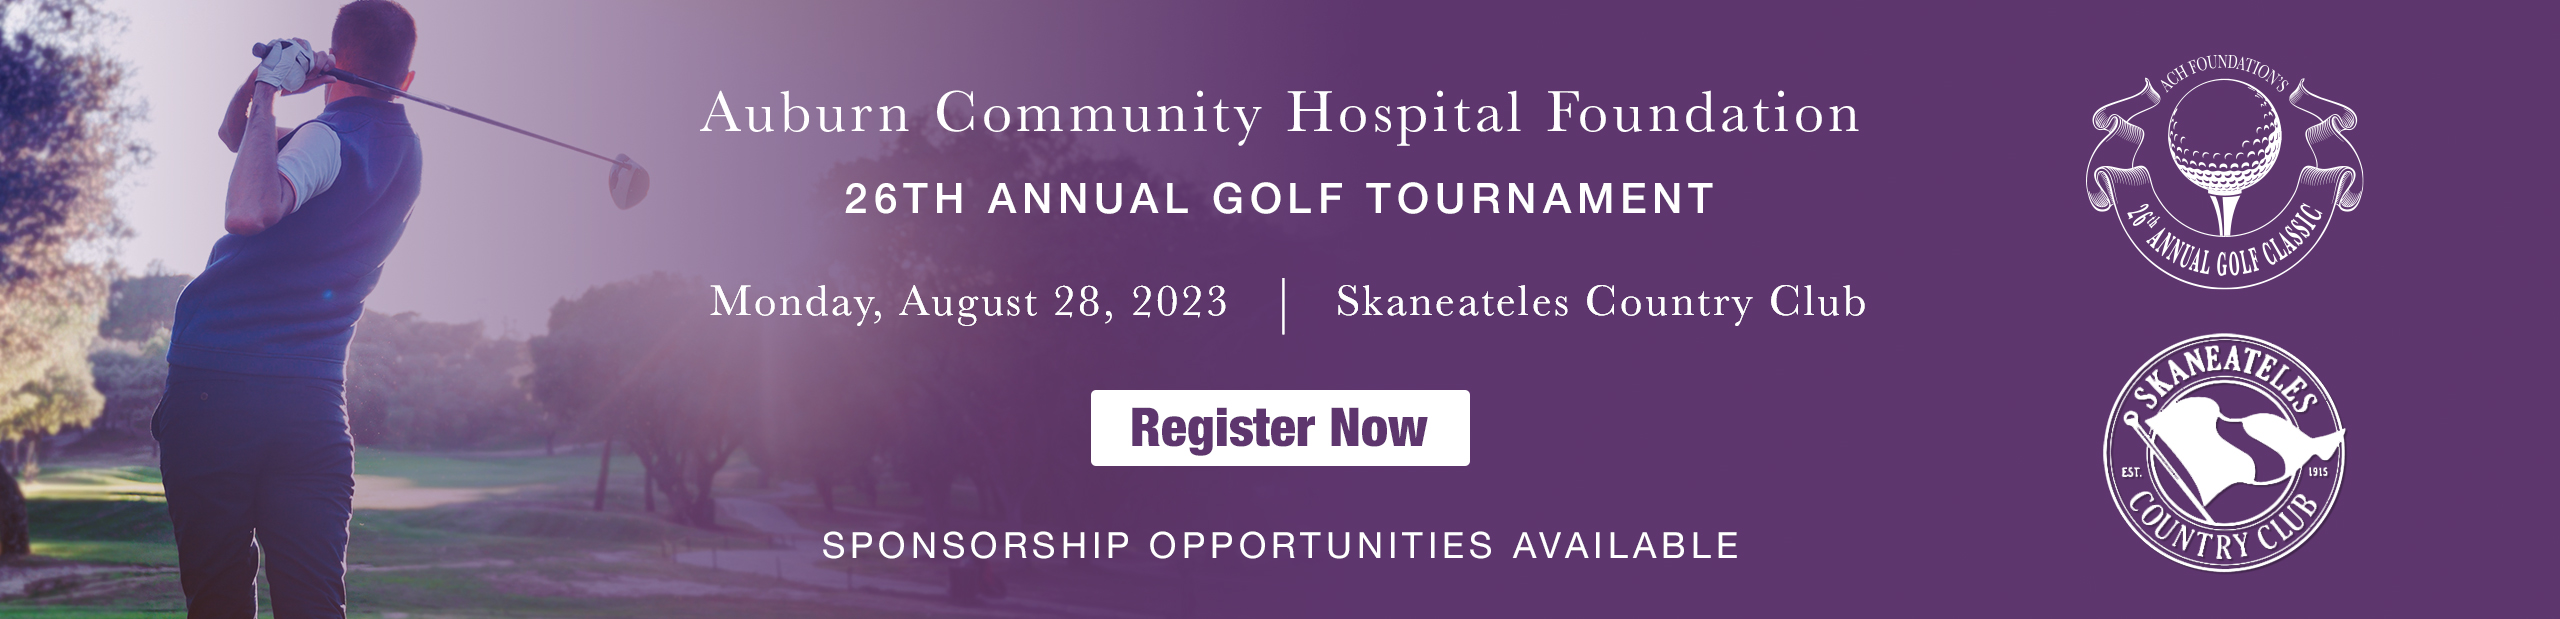 Auburn Community Hospital Foundation's 26th Annual Golf Classic will be held at Skaneateles Country Club on Monday, August 28, 2023.